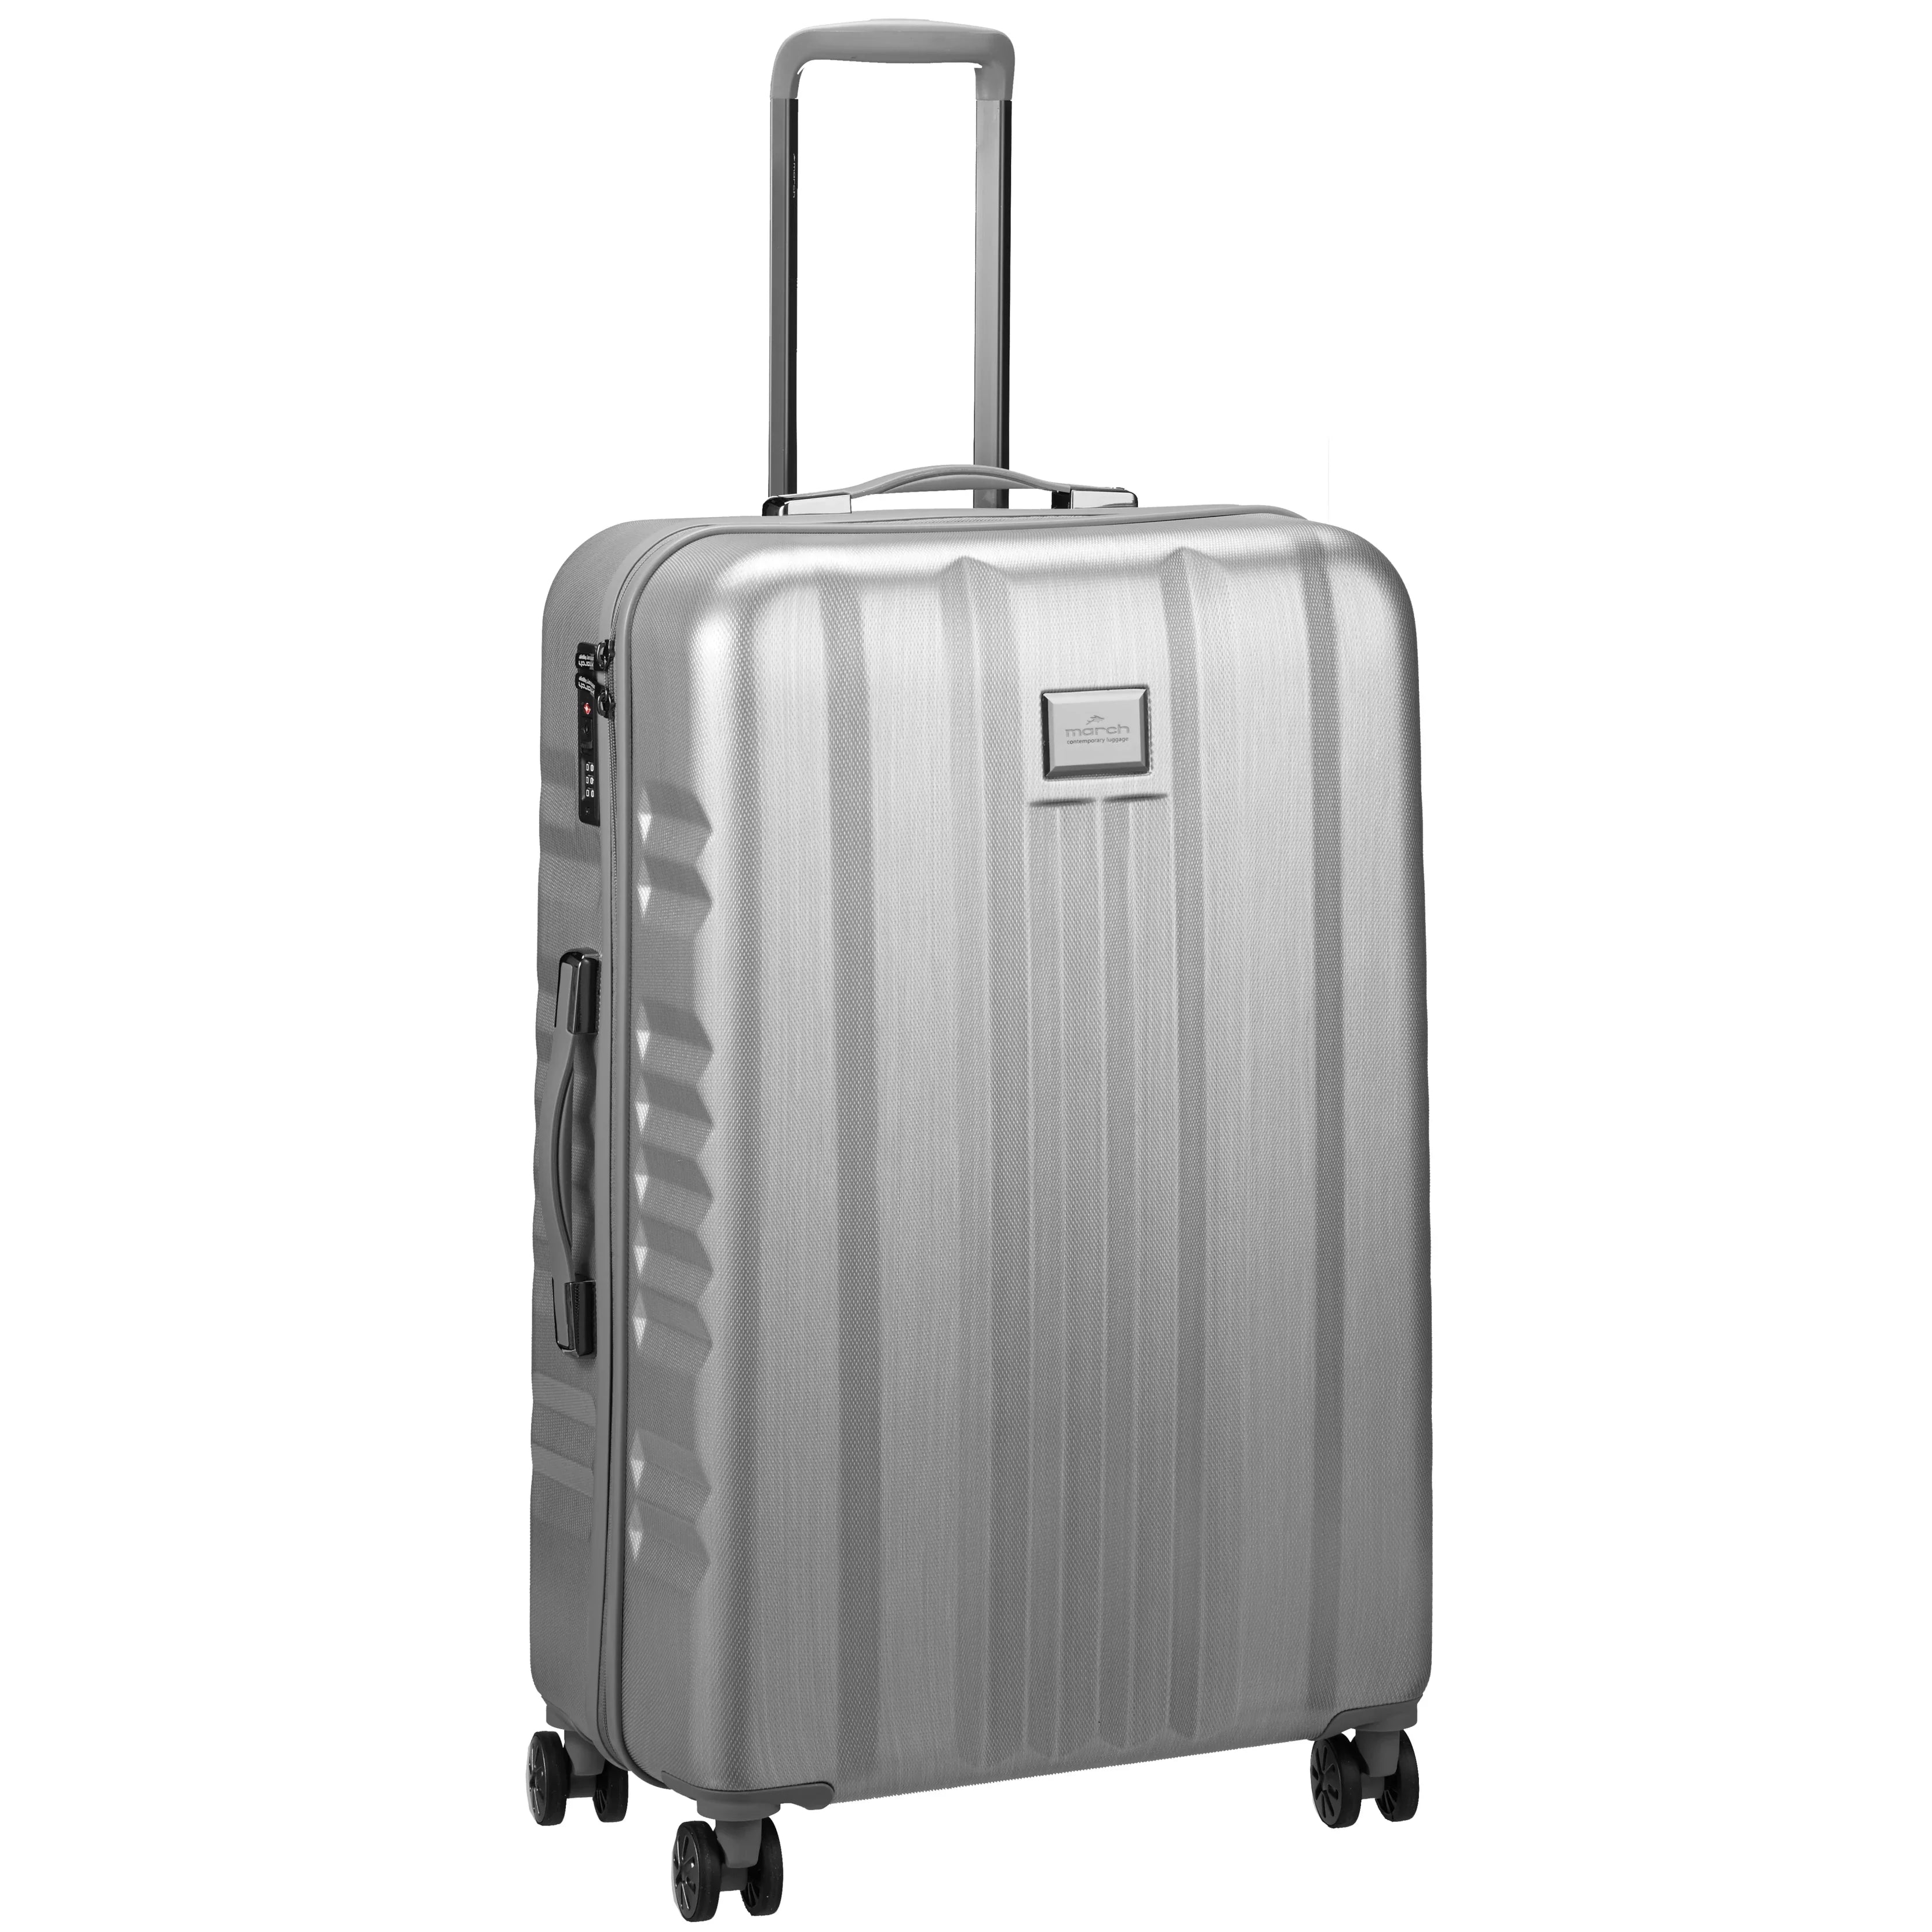 March 15 Trading Fly 4-wheel trolley 65 cm - silver brushed